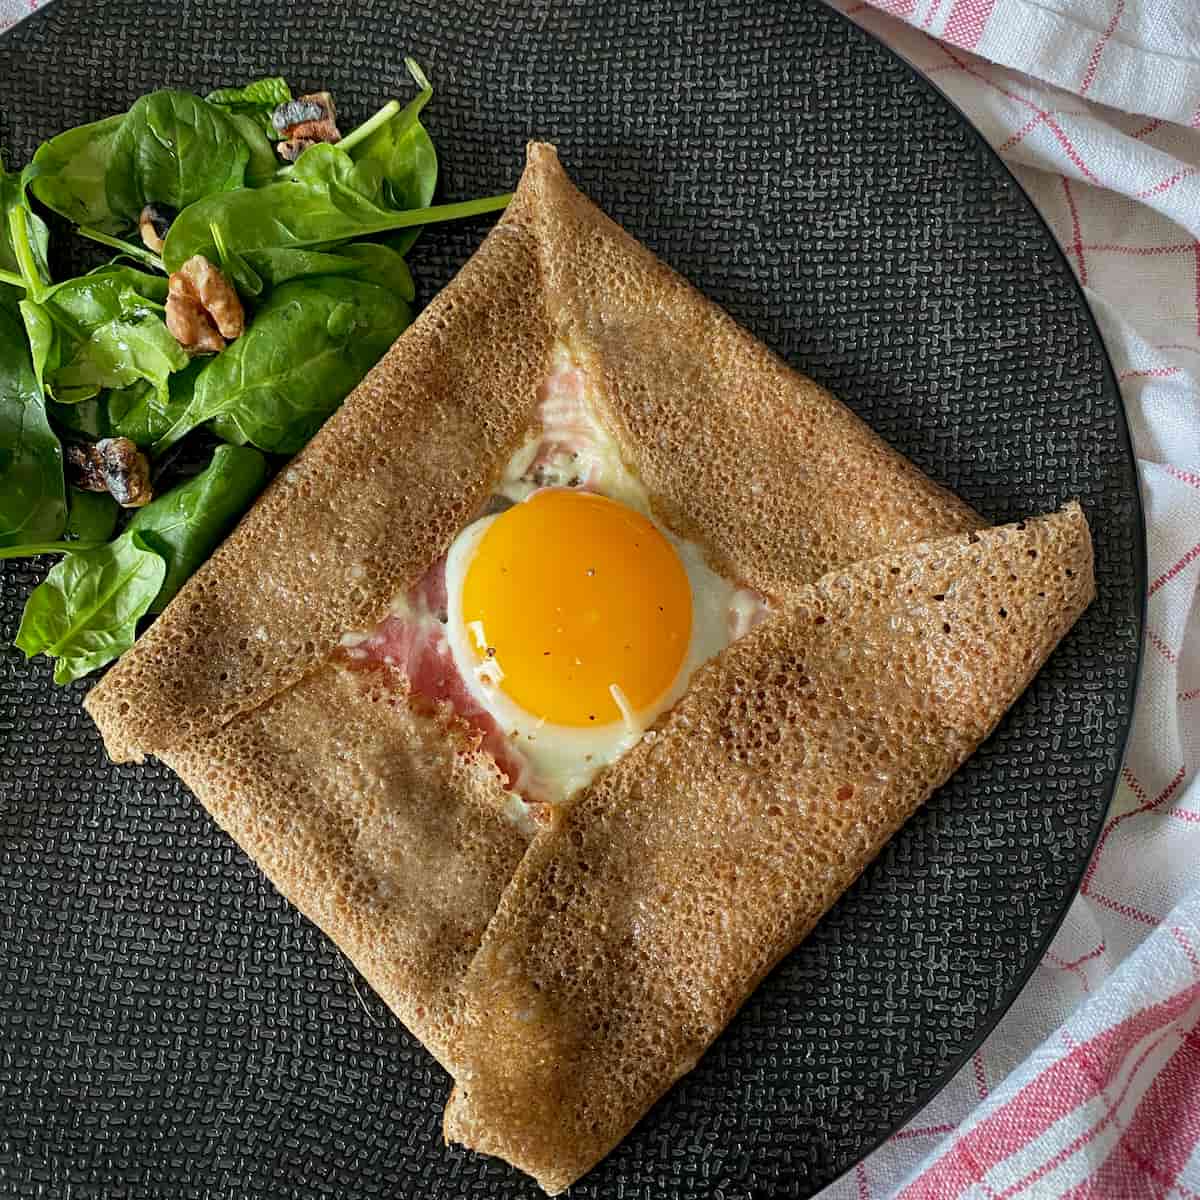 thin brown pancake folded into a square with egg in centre, ham and cheese and side salad